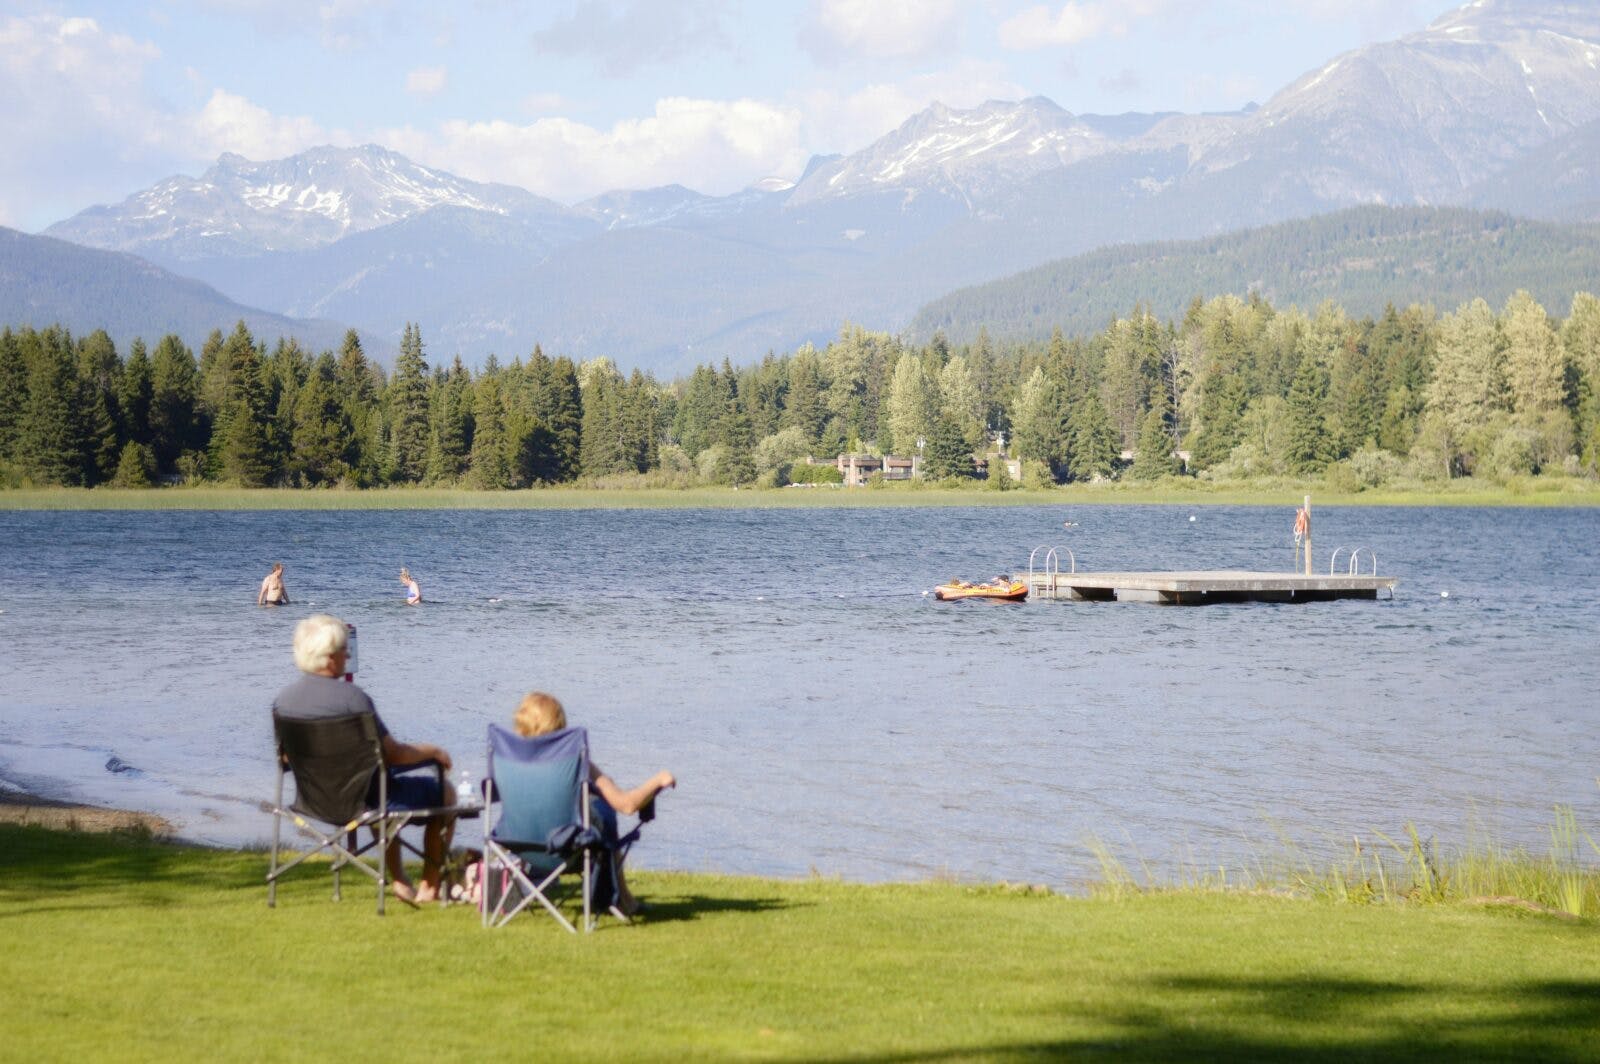 people sitting on the camping chair while looking at others swimming in the lake